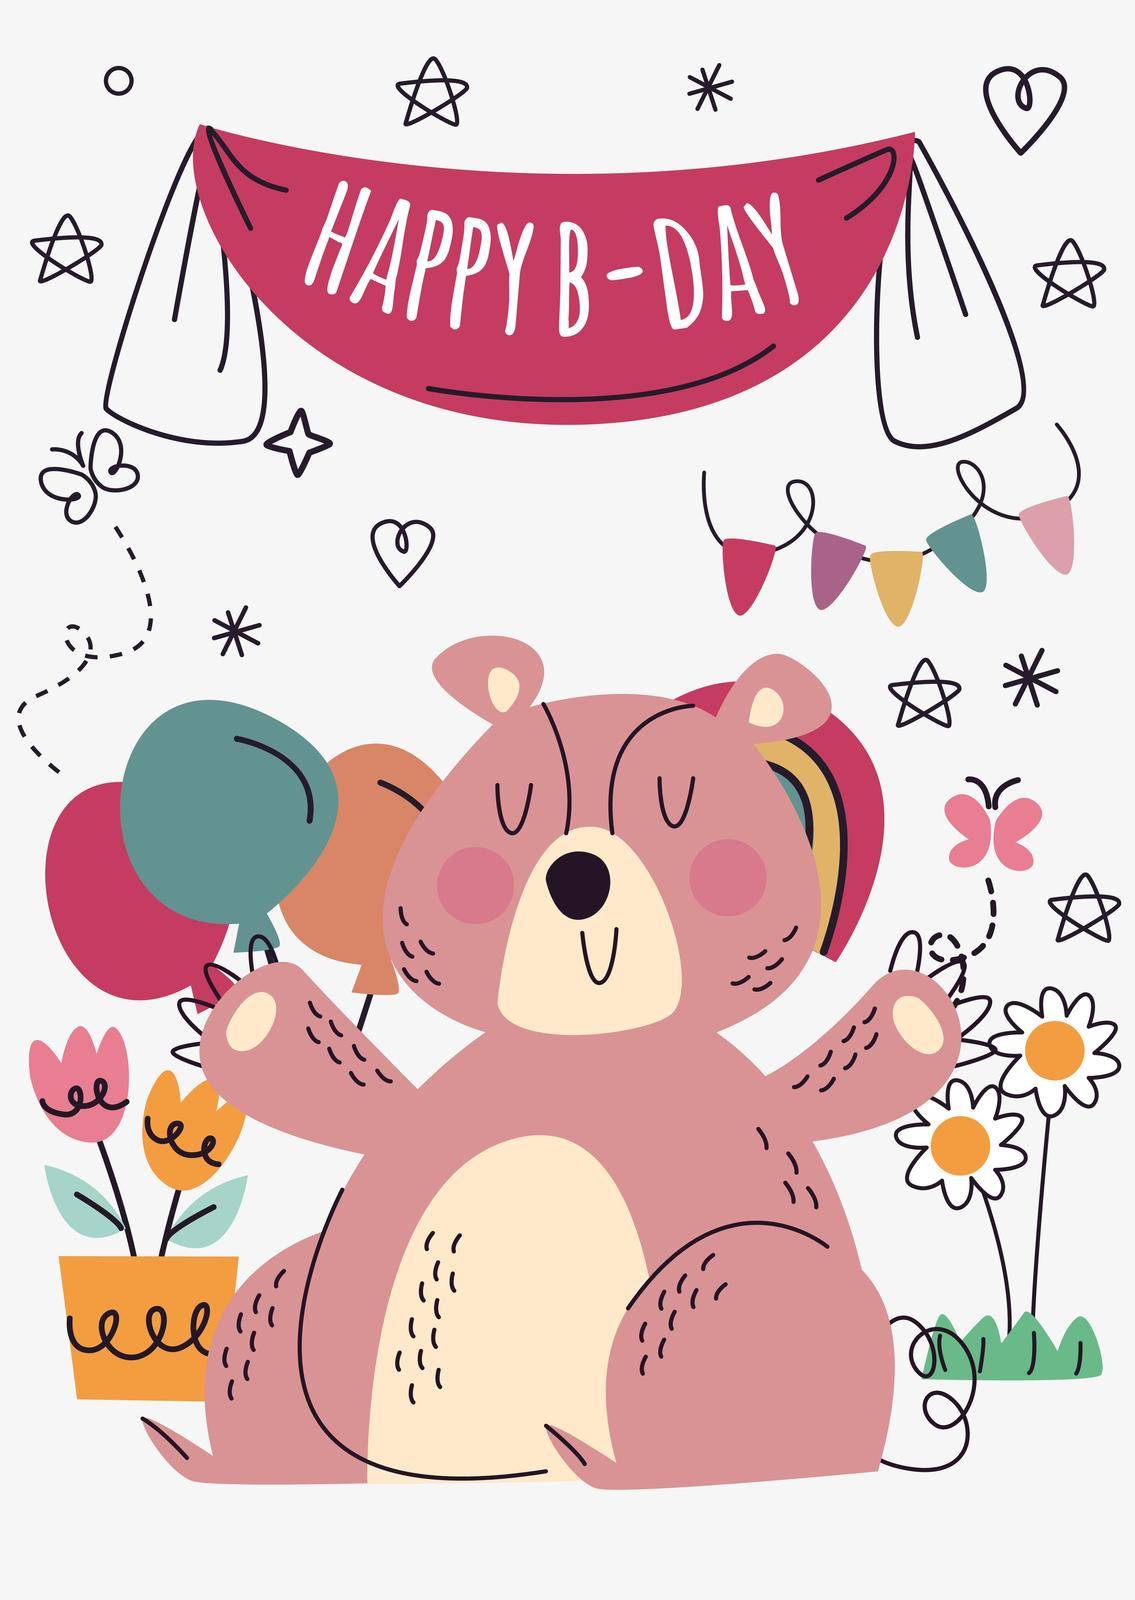 Greeting card with cute hand drawn animal. Birthday card with fun animal. vector illustration